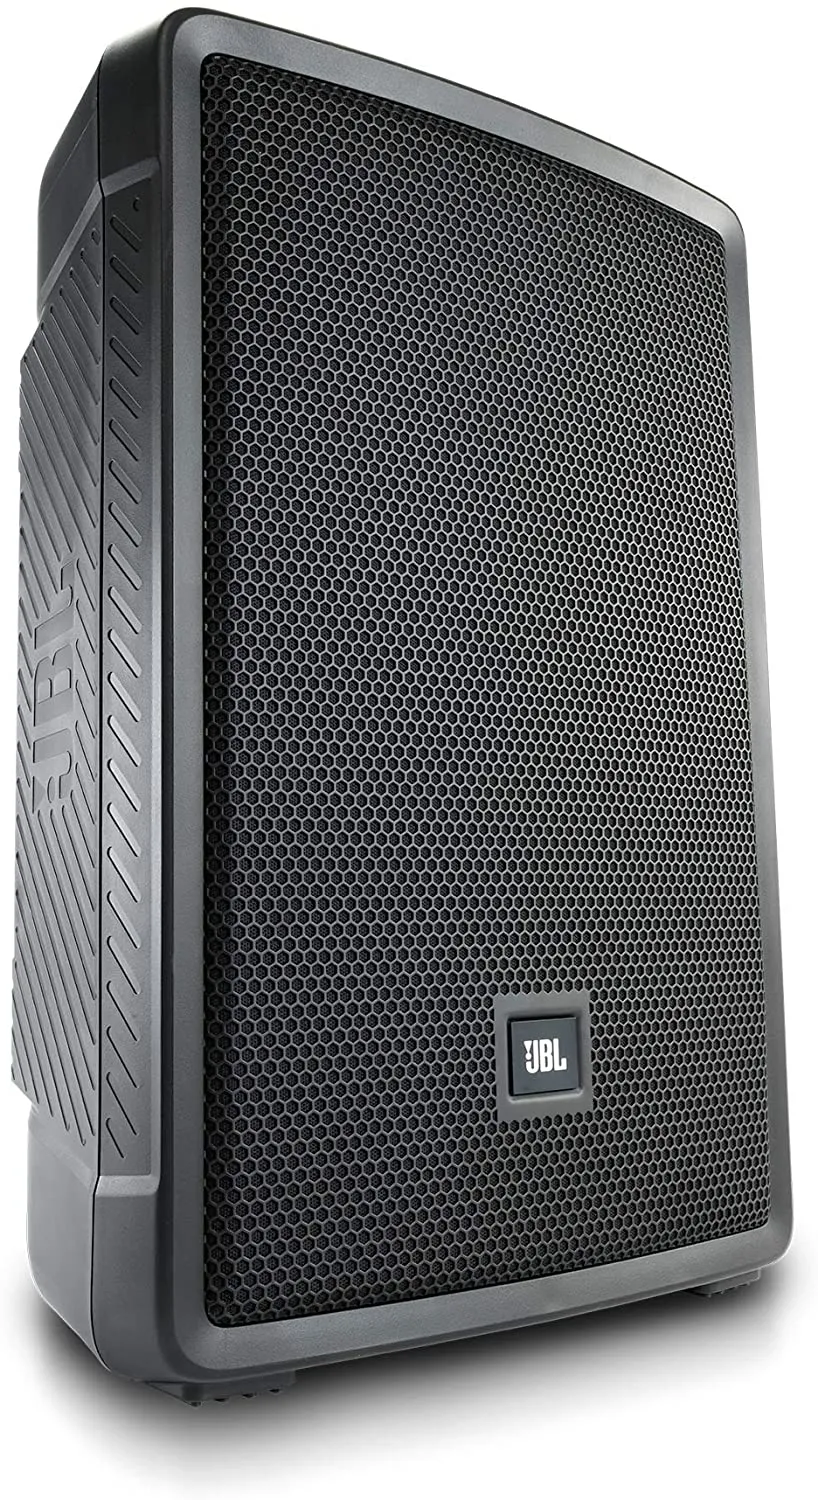 JBL Pro Delivers Another PA For the Singer/Songwriter With New IRX Series Powered Loudspeakers With Bluetooth